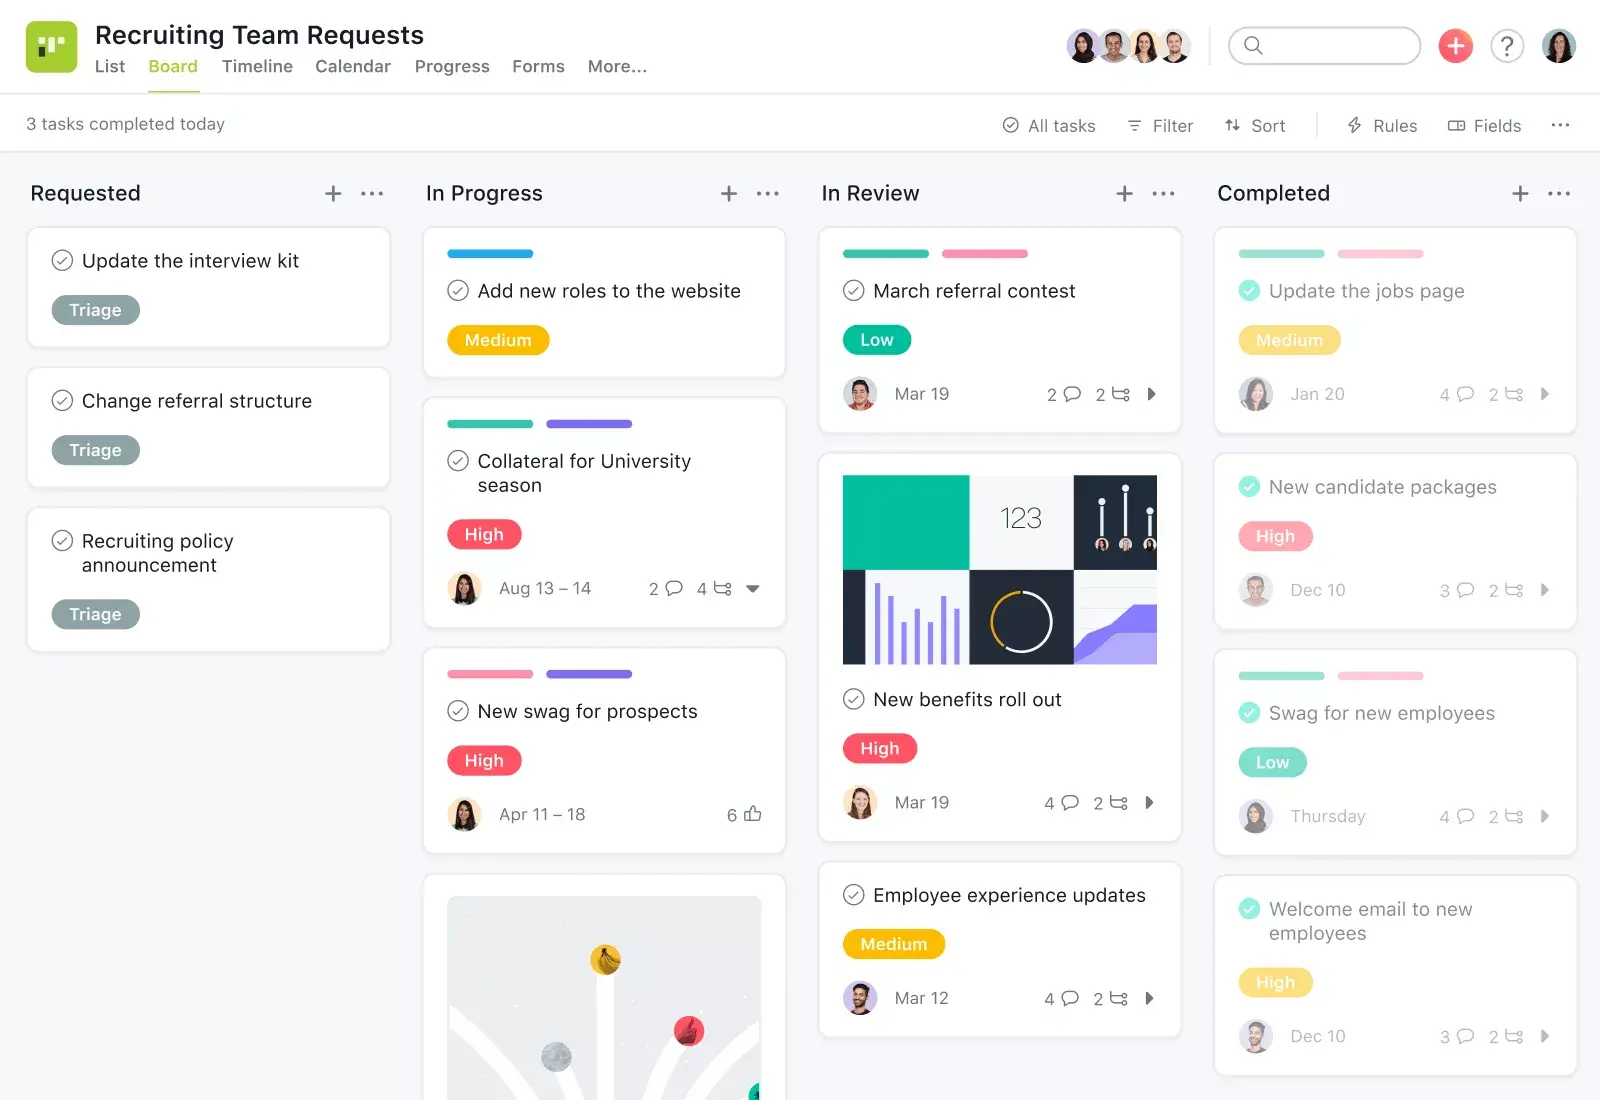 A product UI showing a kanban-style board titled "Recruiting Team Requests"